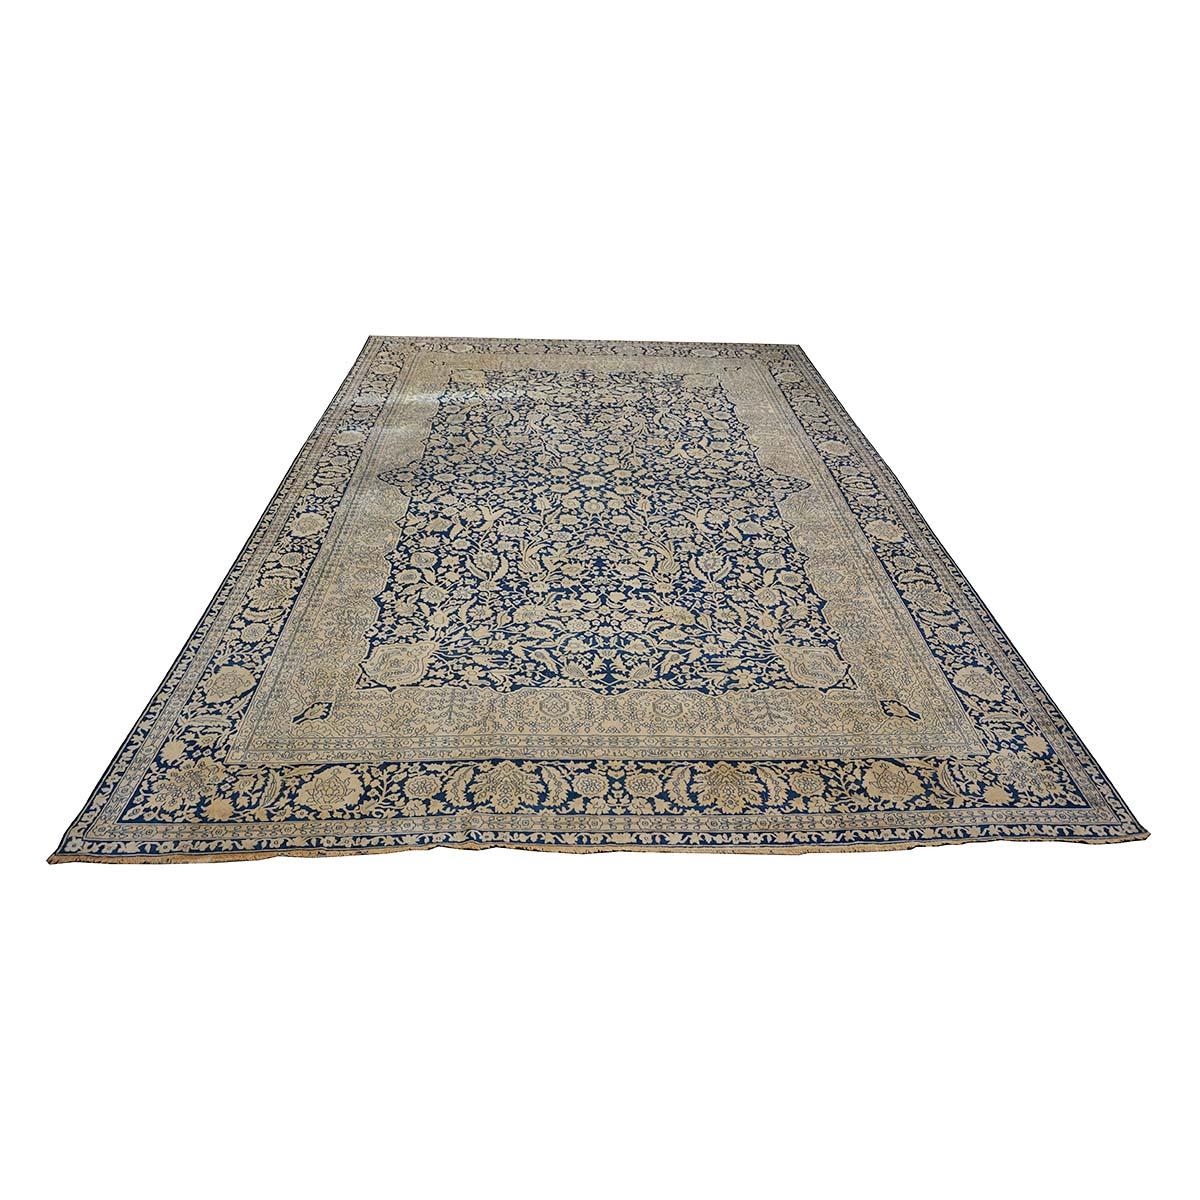  Ashly Fine Rugs presents an exquisite 1880s Antique Persian Mohtasham Kashan roughly 9x12 woven with an indigo blue background and tan borders. This is an example of a well-preserved extremely fine Kashan made of Kork Manchester wool and all four